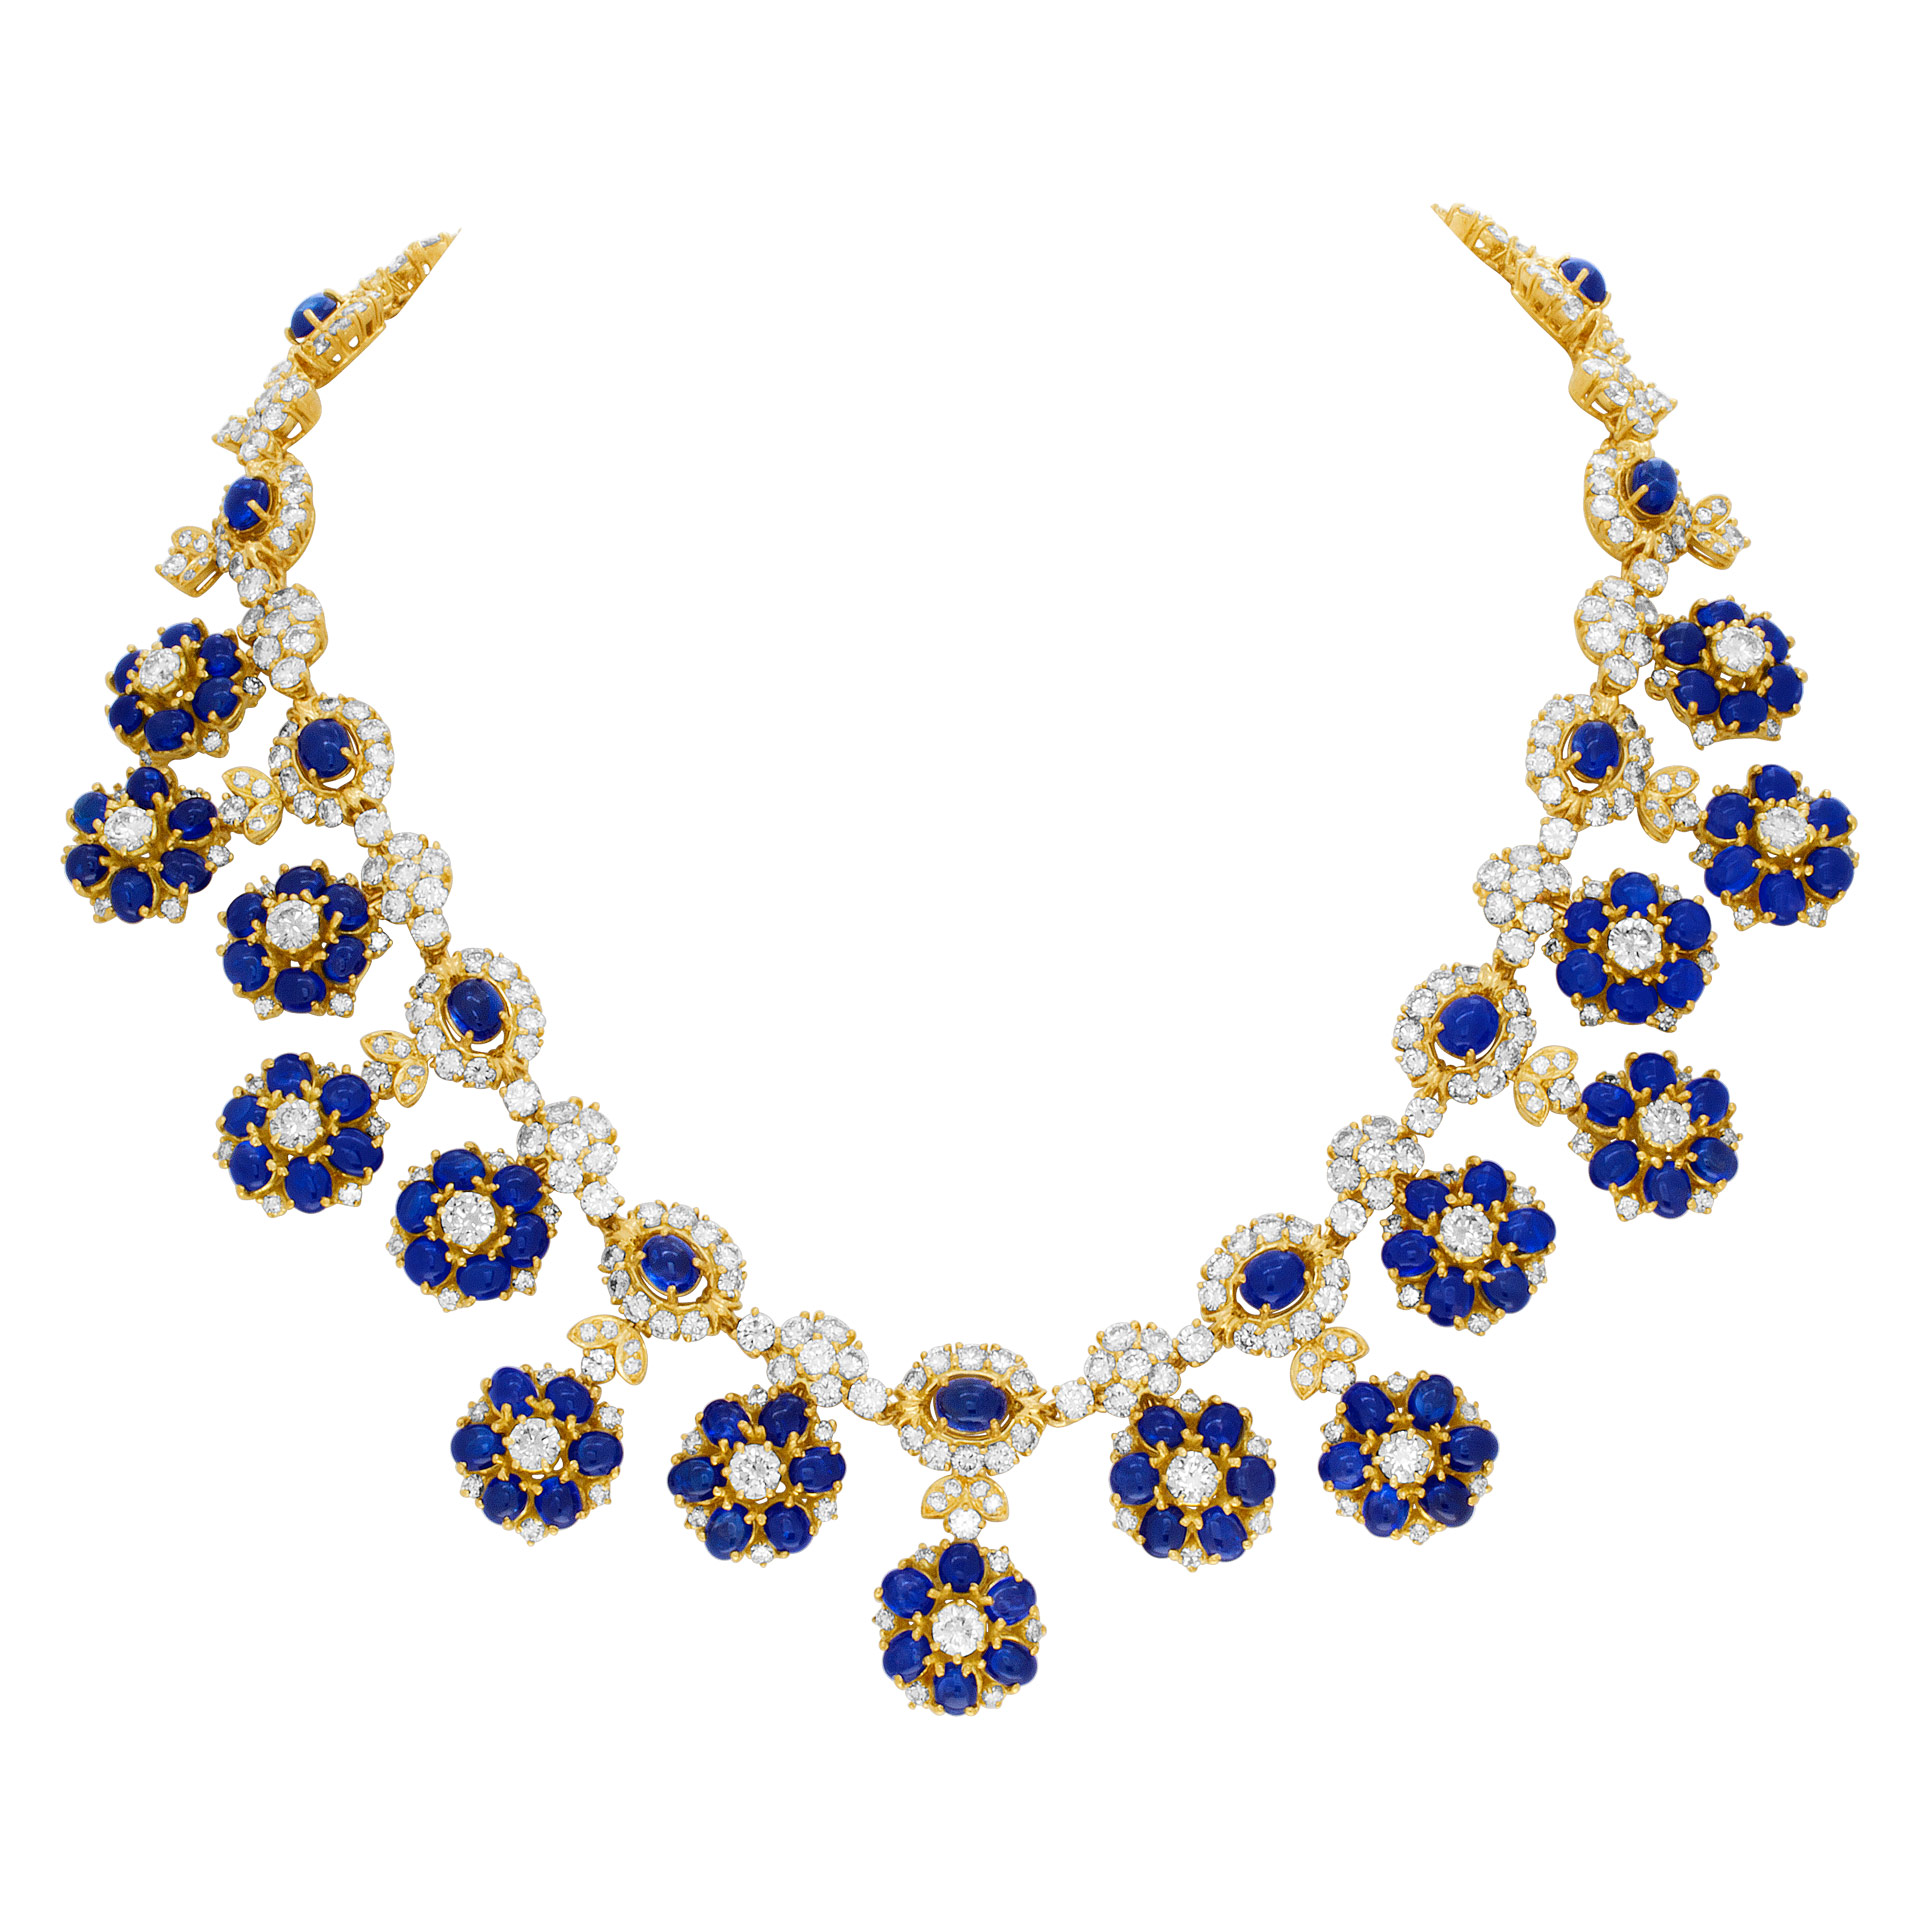 Harry Winston Sapphire and Diamond Necklace in 18k yellow gold